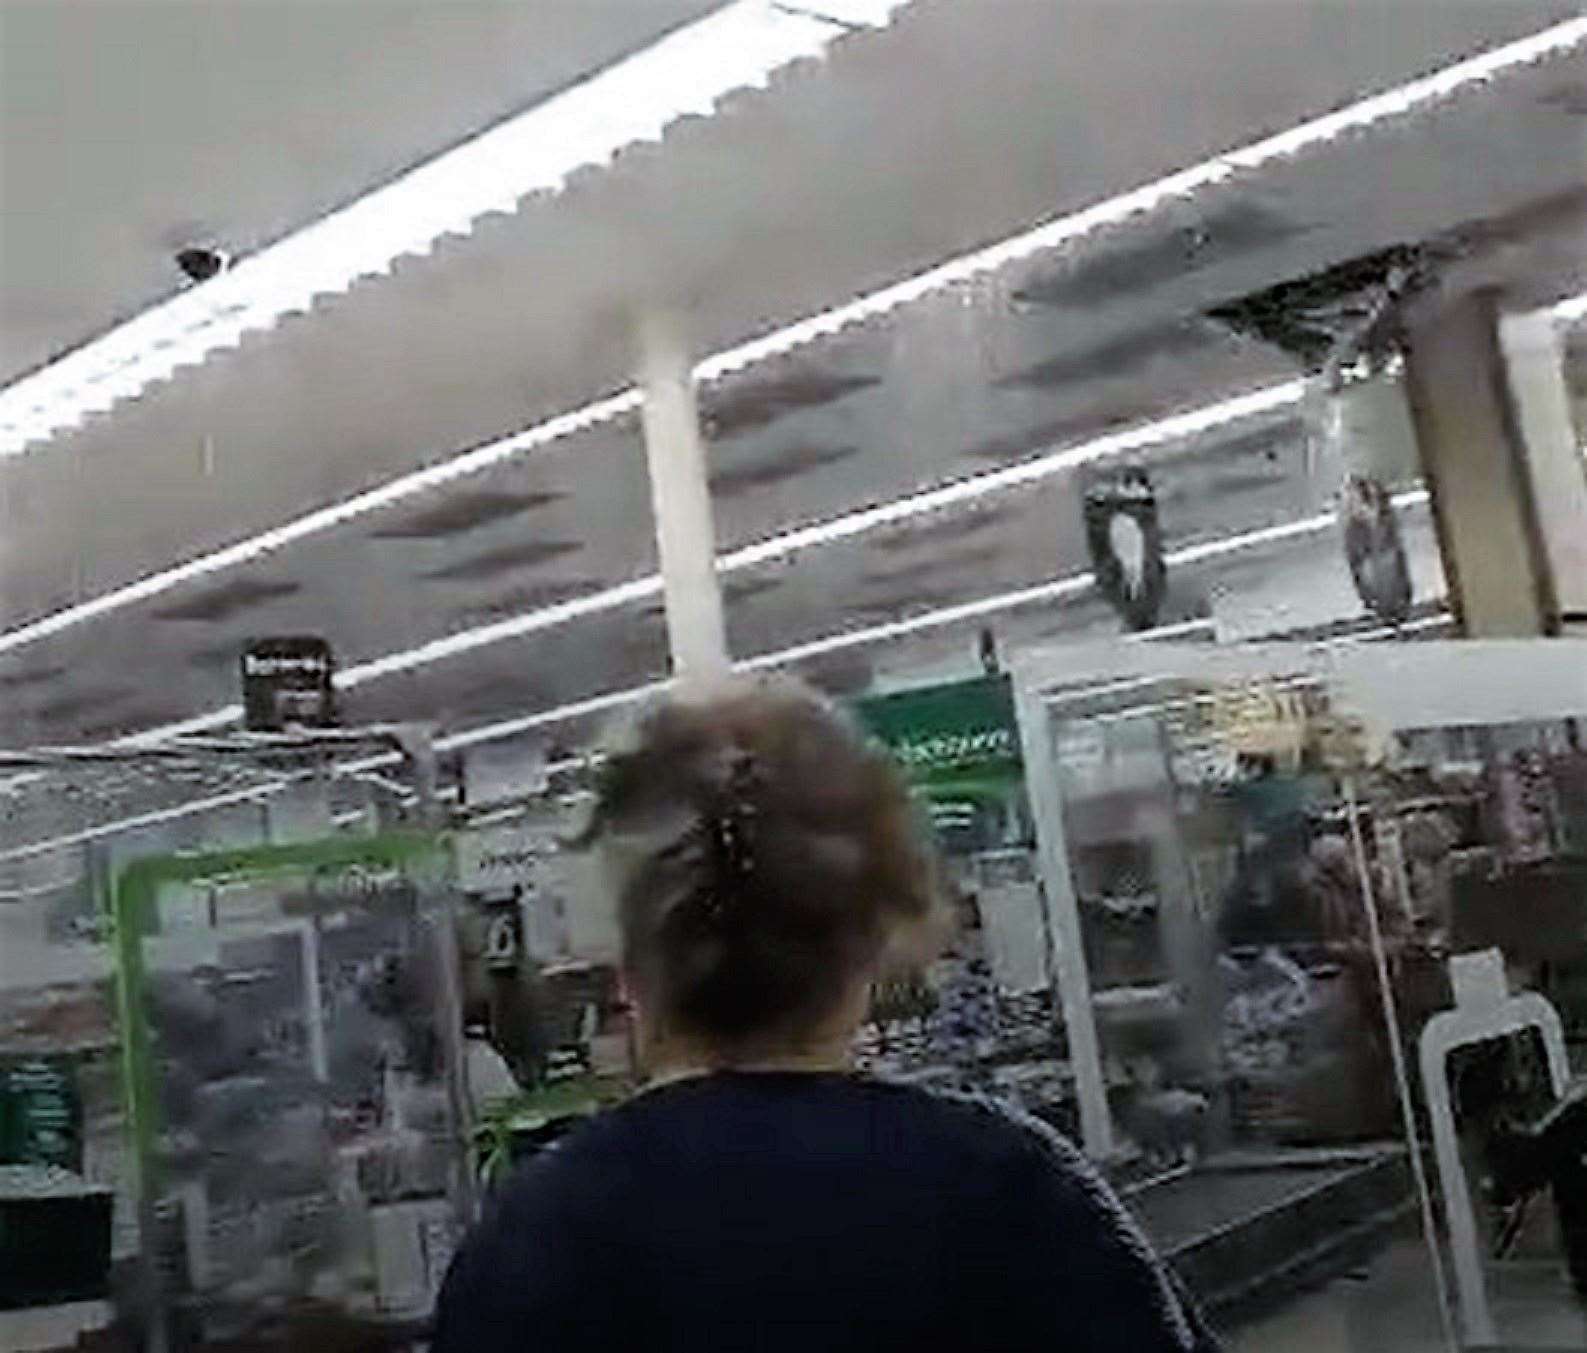 The moment more ceiling tiles fell through into the Morrisons store was caught on camera